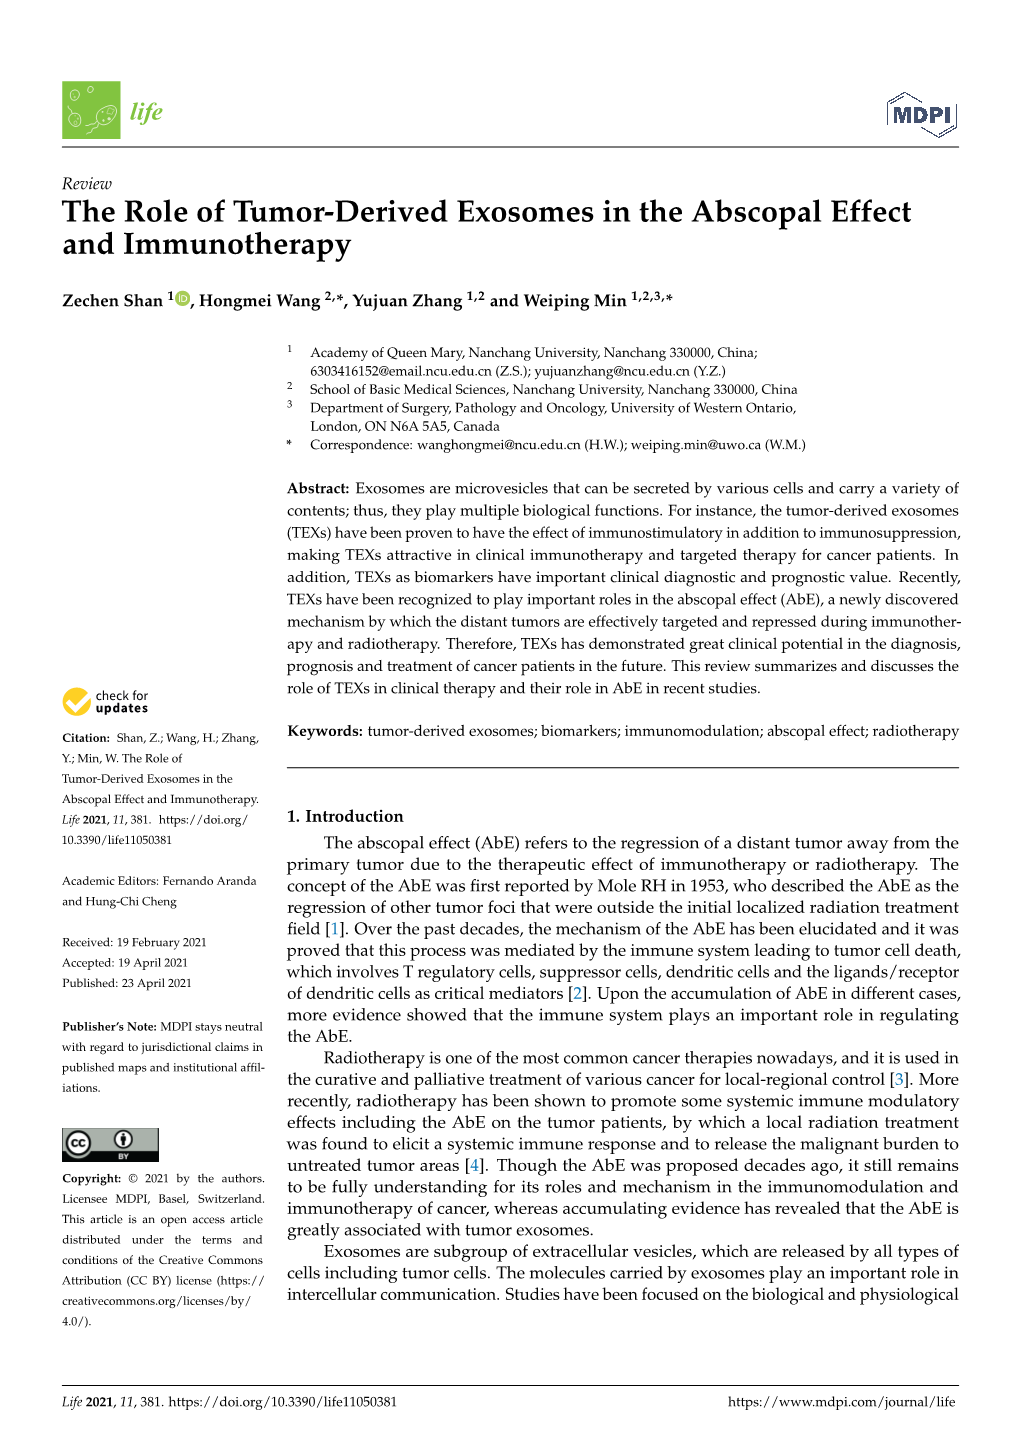 The Role of Tumor-Derived Exosomes in the Abscopal Effect and Immunotherapy